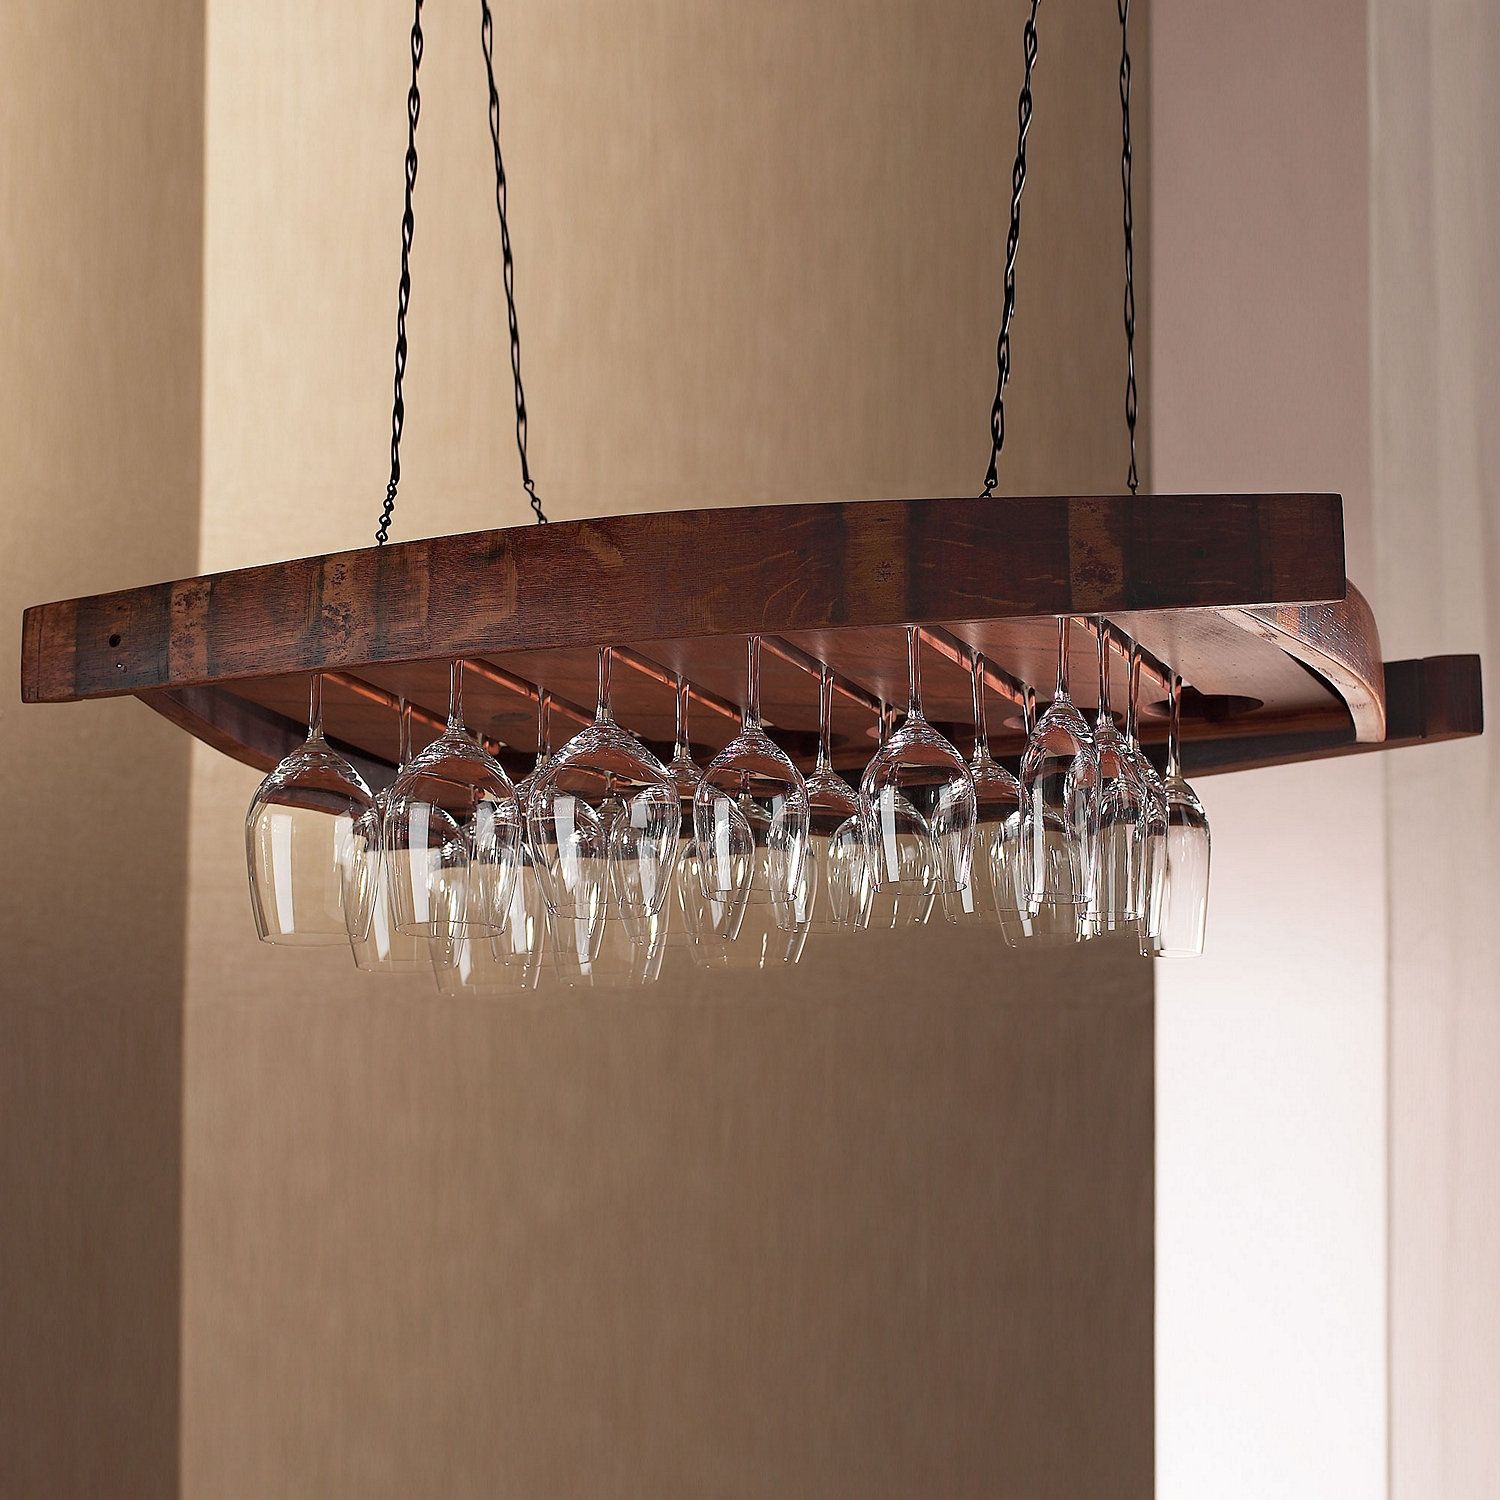 Vintage Oak Hanging Wine Glass Rack Wine Enthusiast Regarding Hanging Glass Shelves From Ceiling (View 11 of 12)